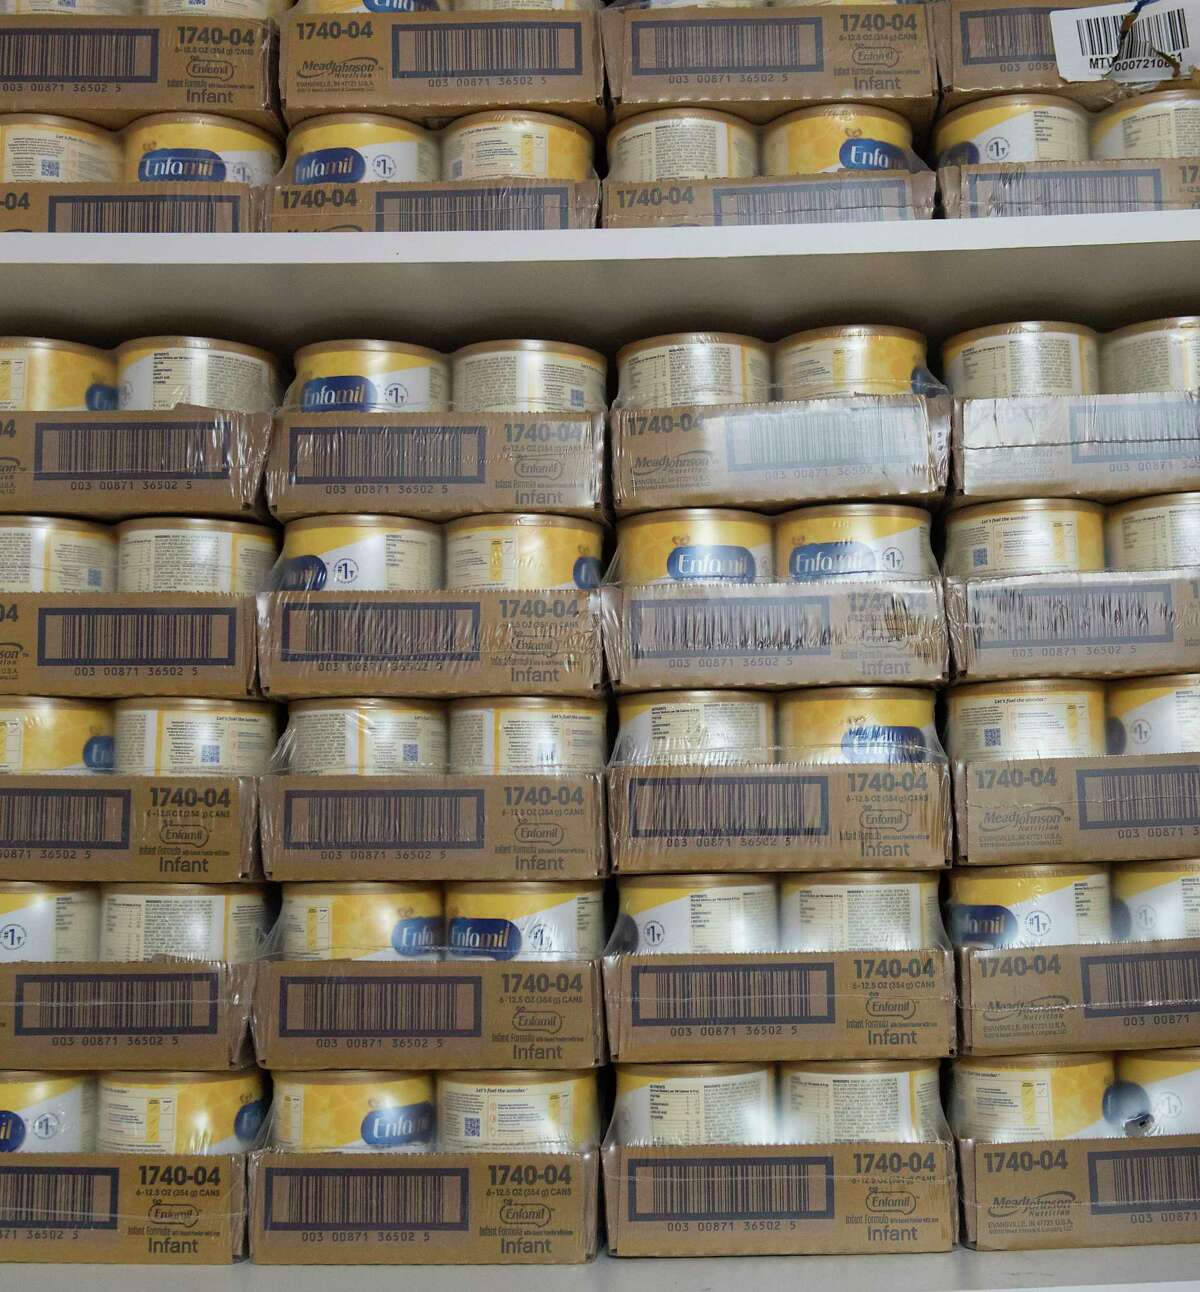 Cases of infant formula is seen on shelves at The Food Pantries for the Capital District on Tuesday, Aug. 2, 2022 in Albany, N.Y. The Food Pantries is organizing a task force to help low-income families acquire infant formula, which is still hard to find.